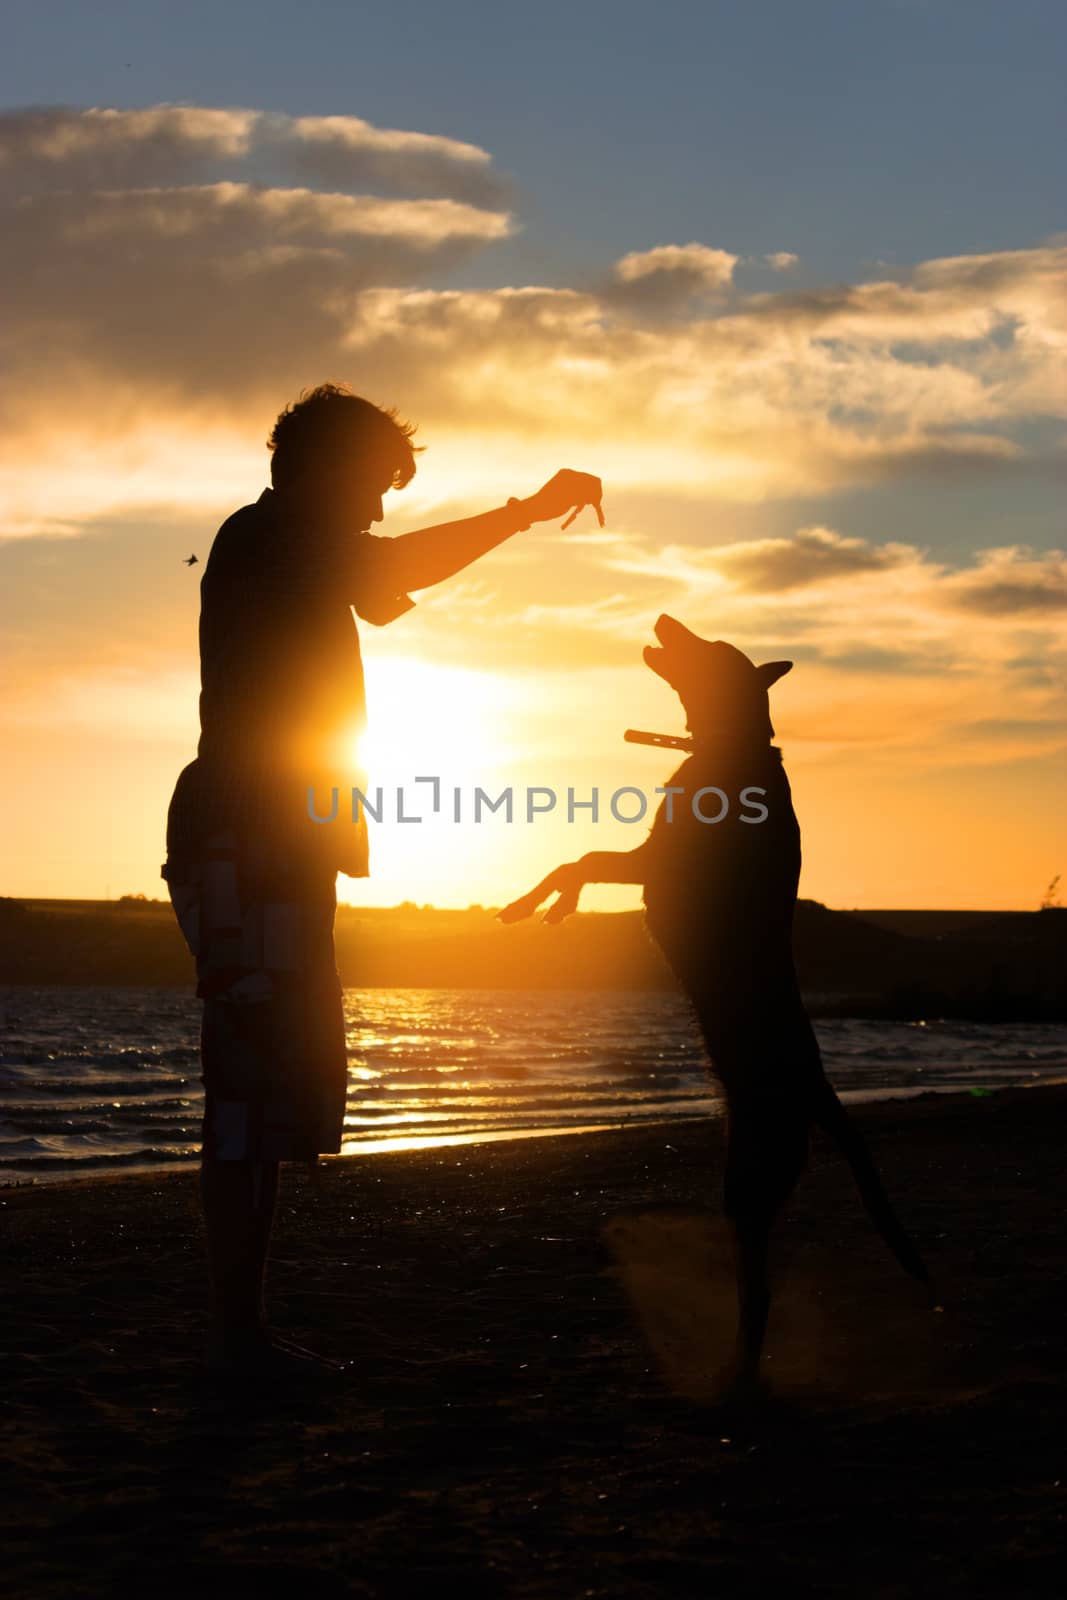 Young man with his dog in nature - back lit